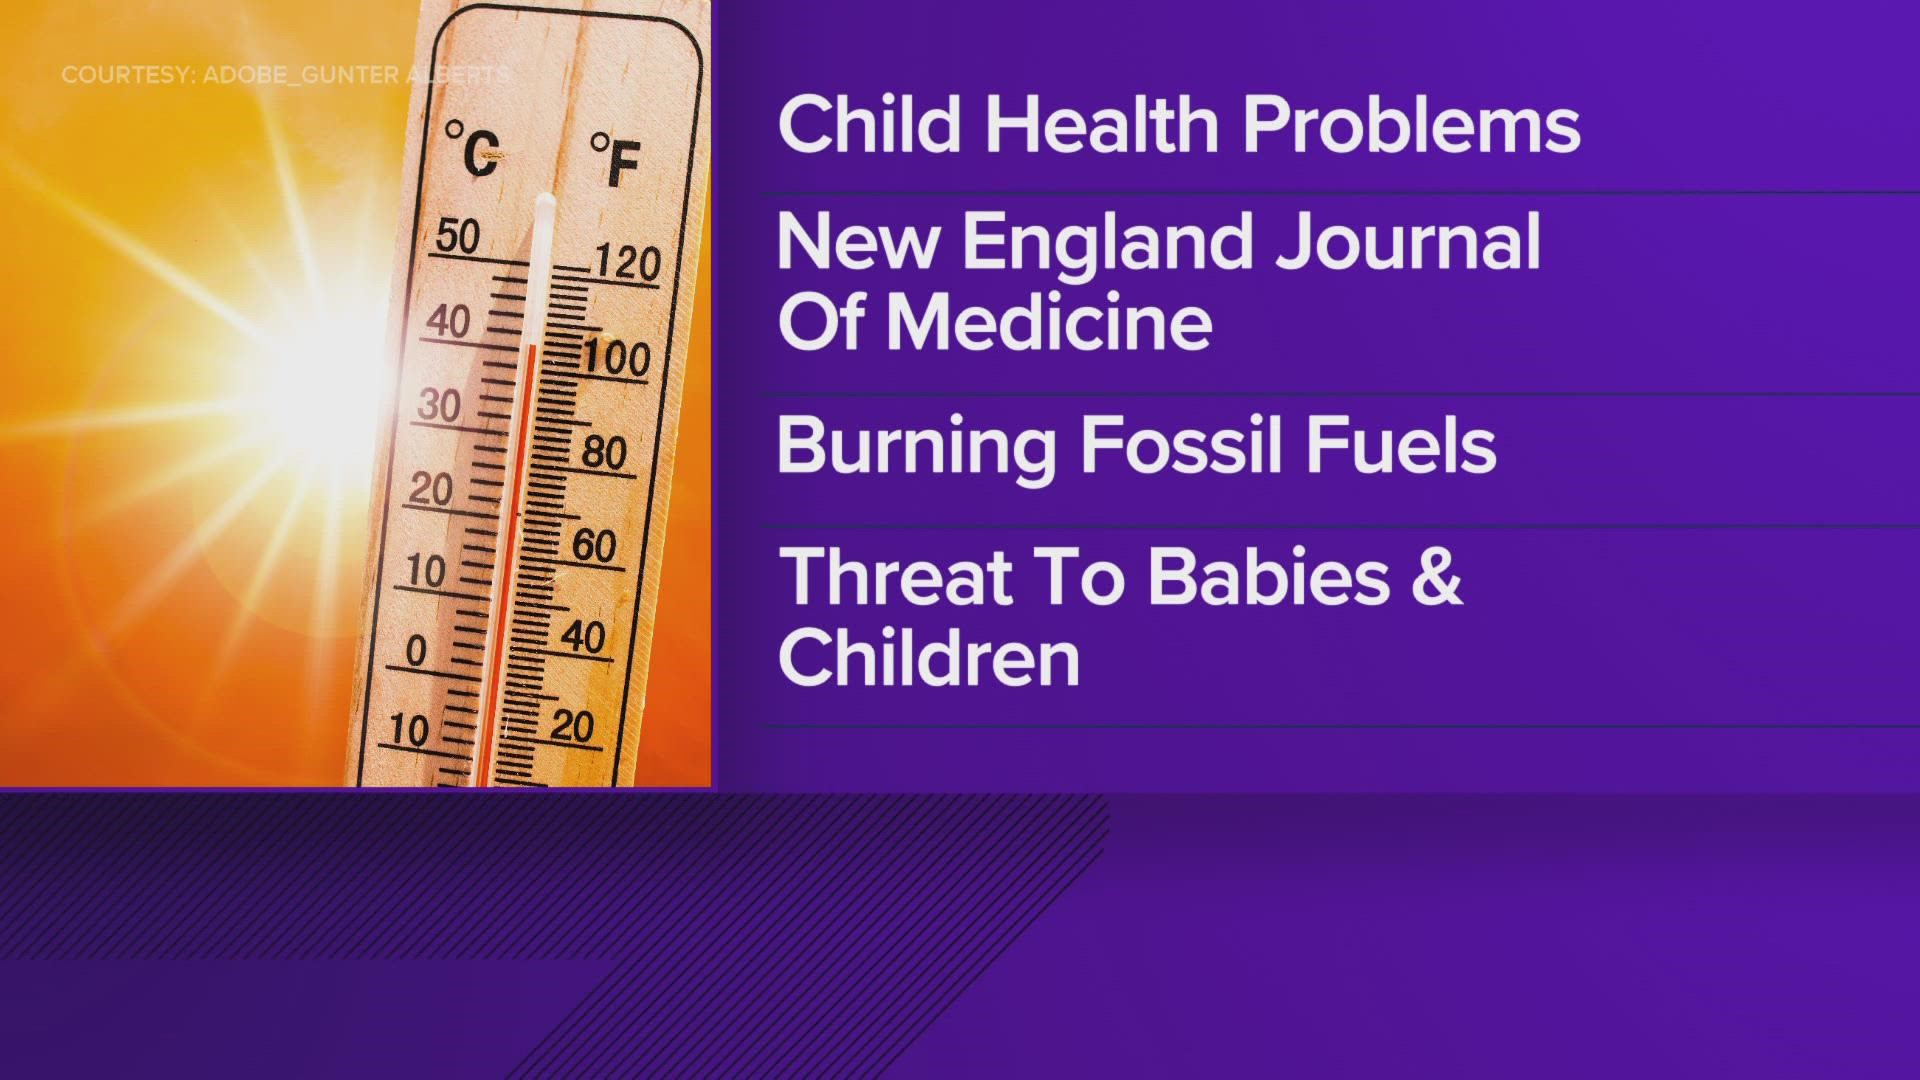 New research suggests such weather extremes can lead to child health problems.